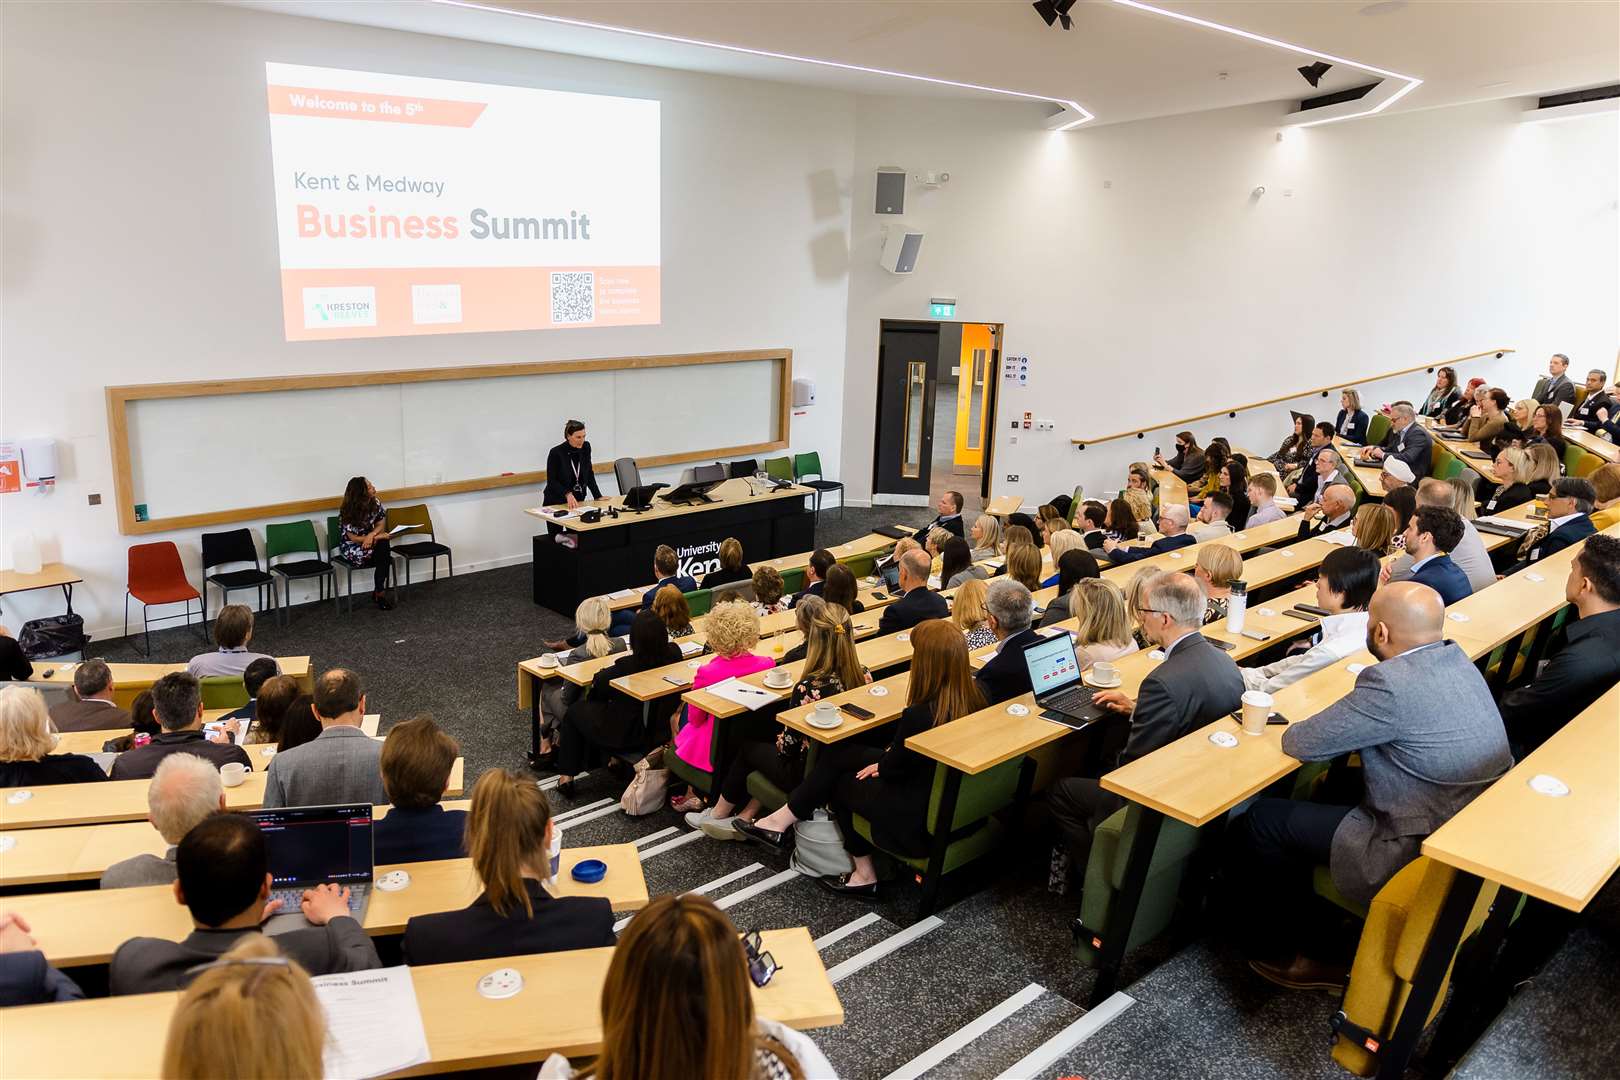 Tickets for next month's Kent & Medway Business Summit are still available